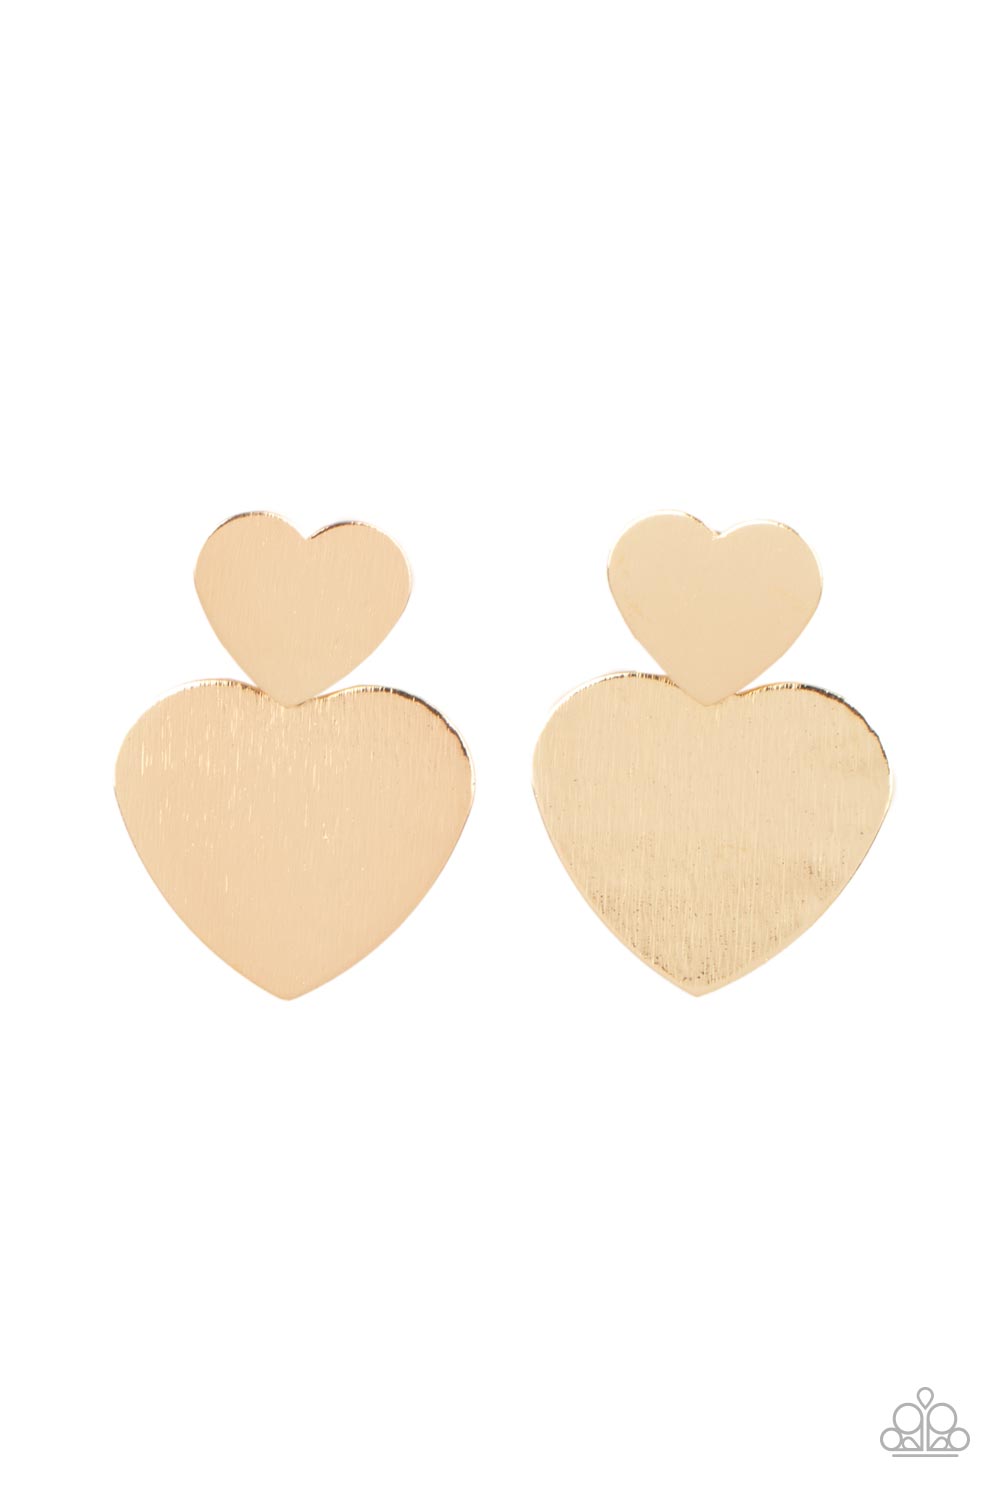 Authentic Louis Vuitton M64922 strawberry Heart Earrings Gold GP